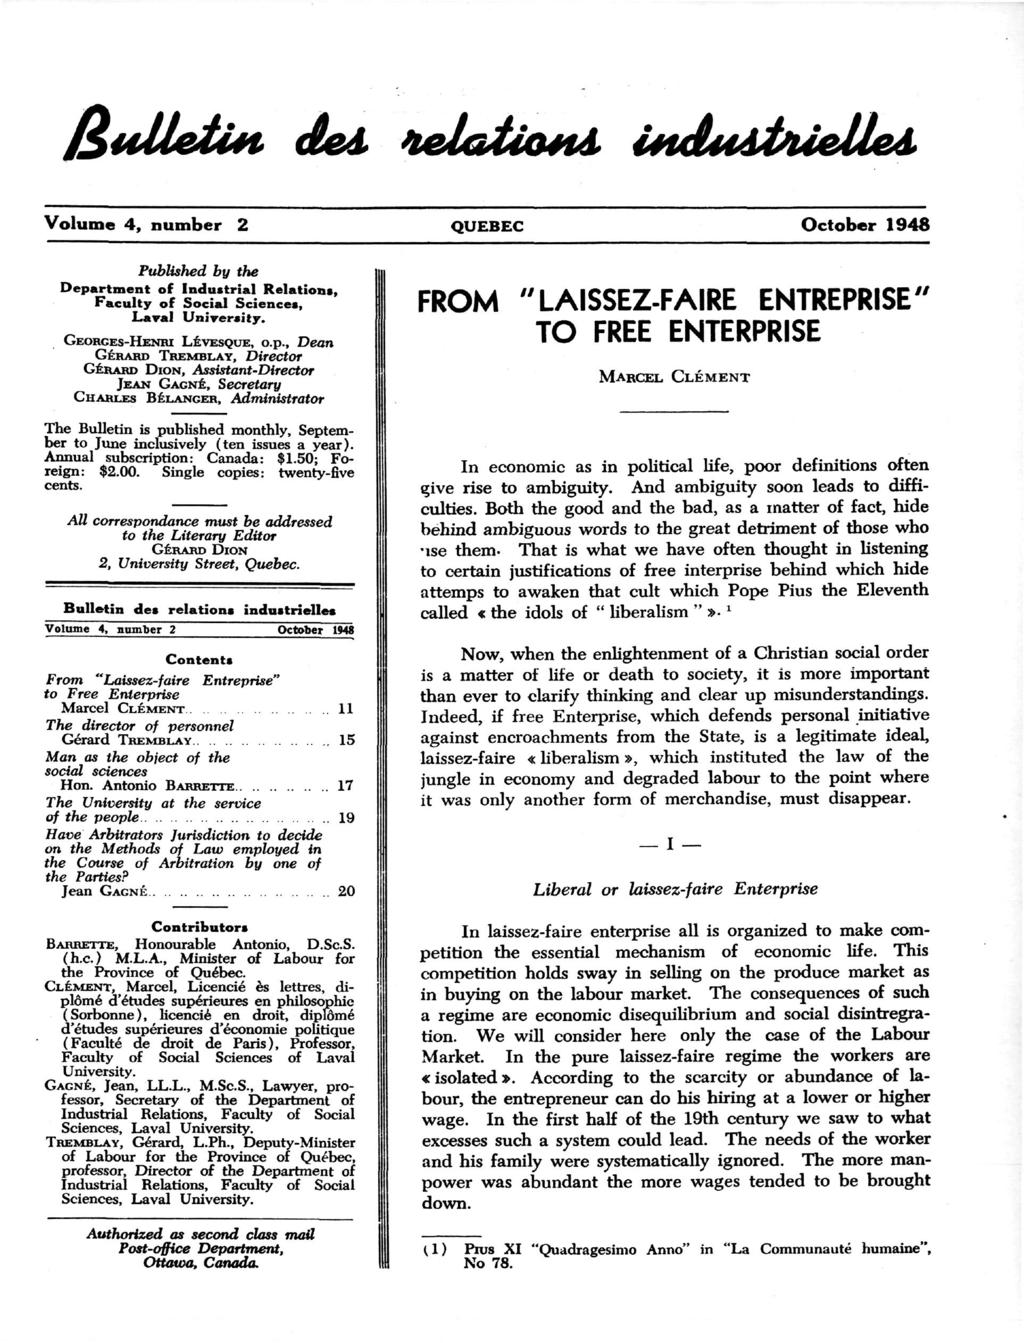 I&ulletiu du telationl iududfuelleà Volume 4, number 2 QUEBEC October 1948 Published by the Department of Industrial Relations, Faculty of Social Sciences, Laval University. GEORGES HENRI LÉVESQUE, o.